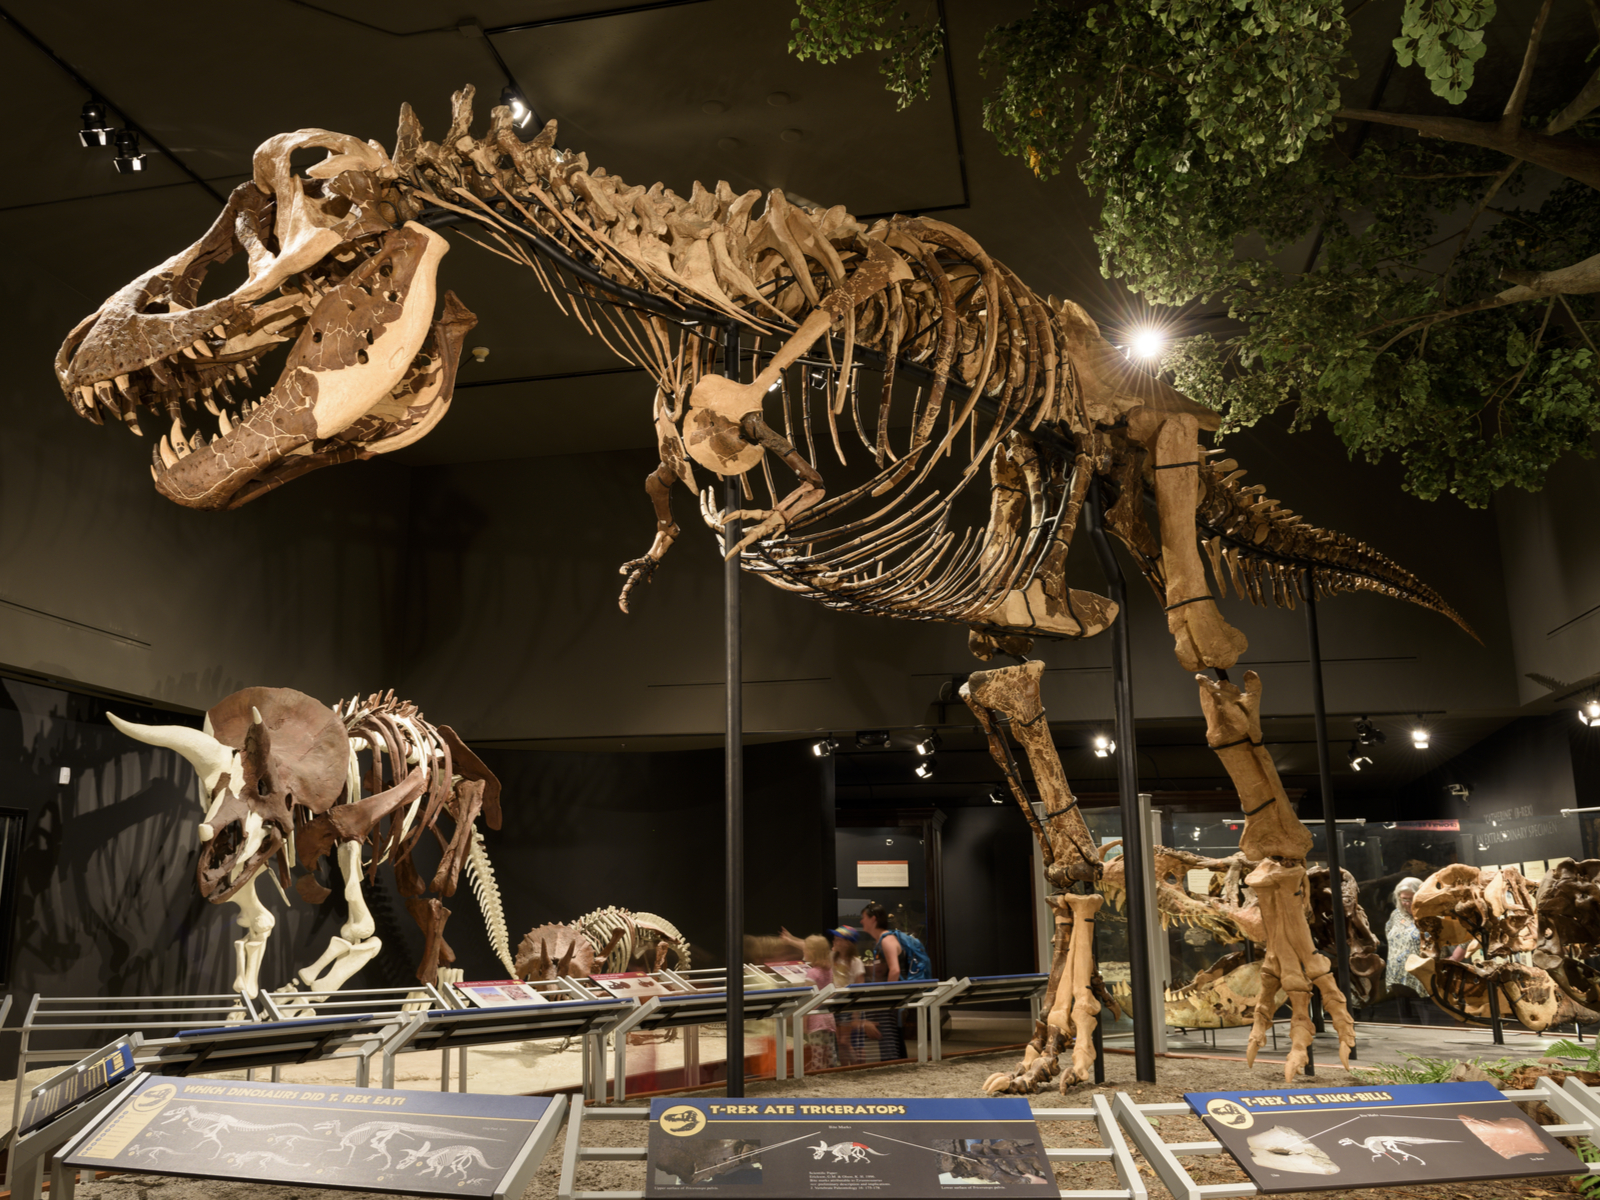 Trex at one of the best places to visit in Motnana, The Museum of the Rockies